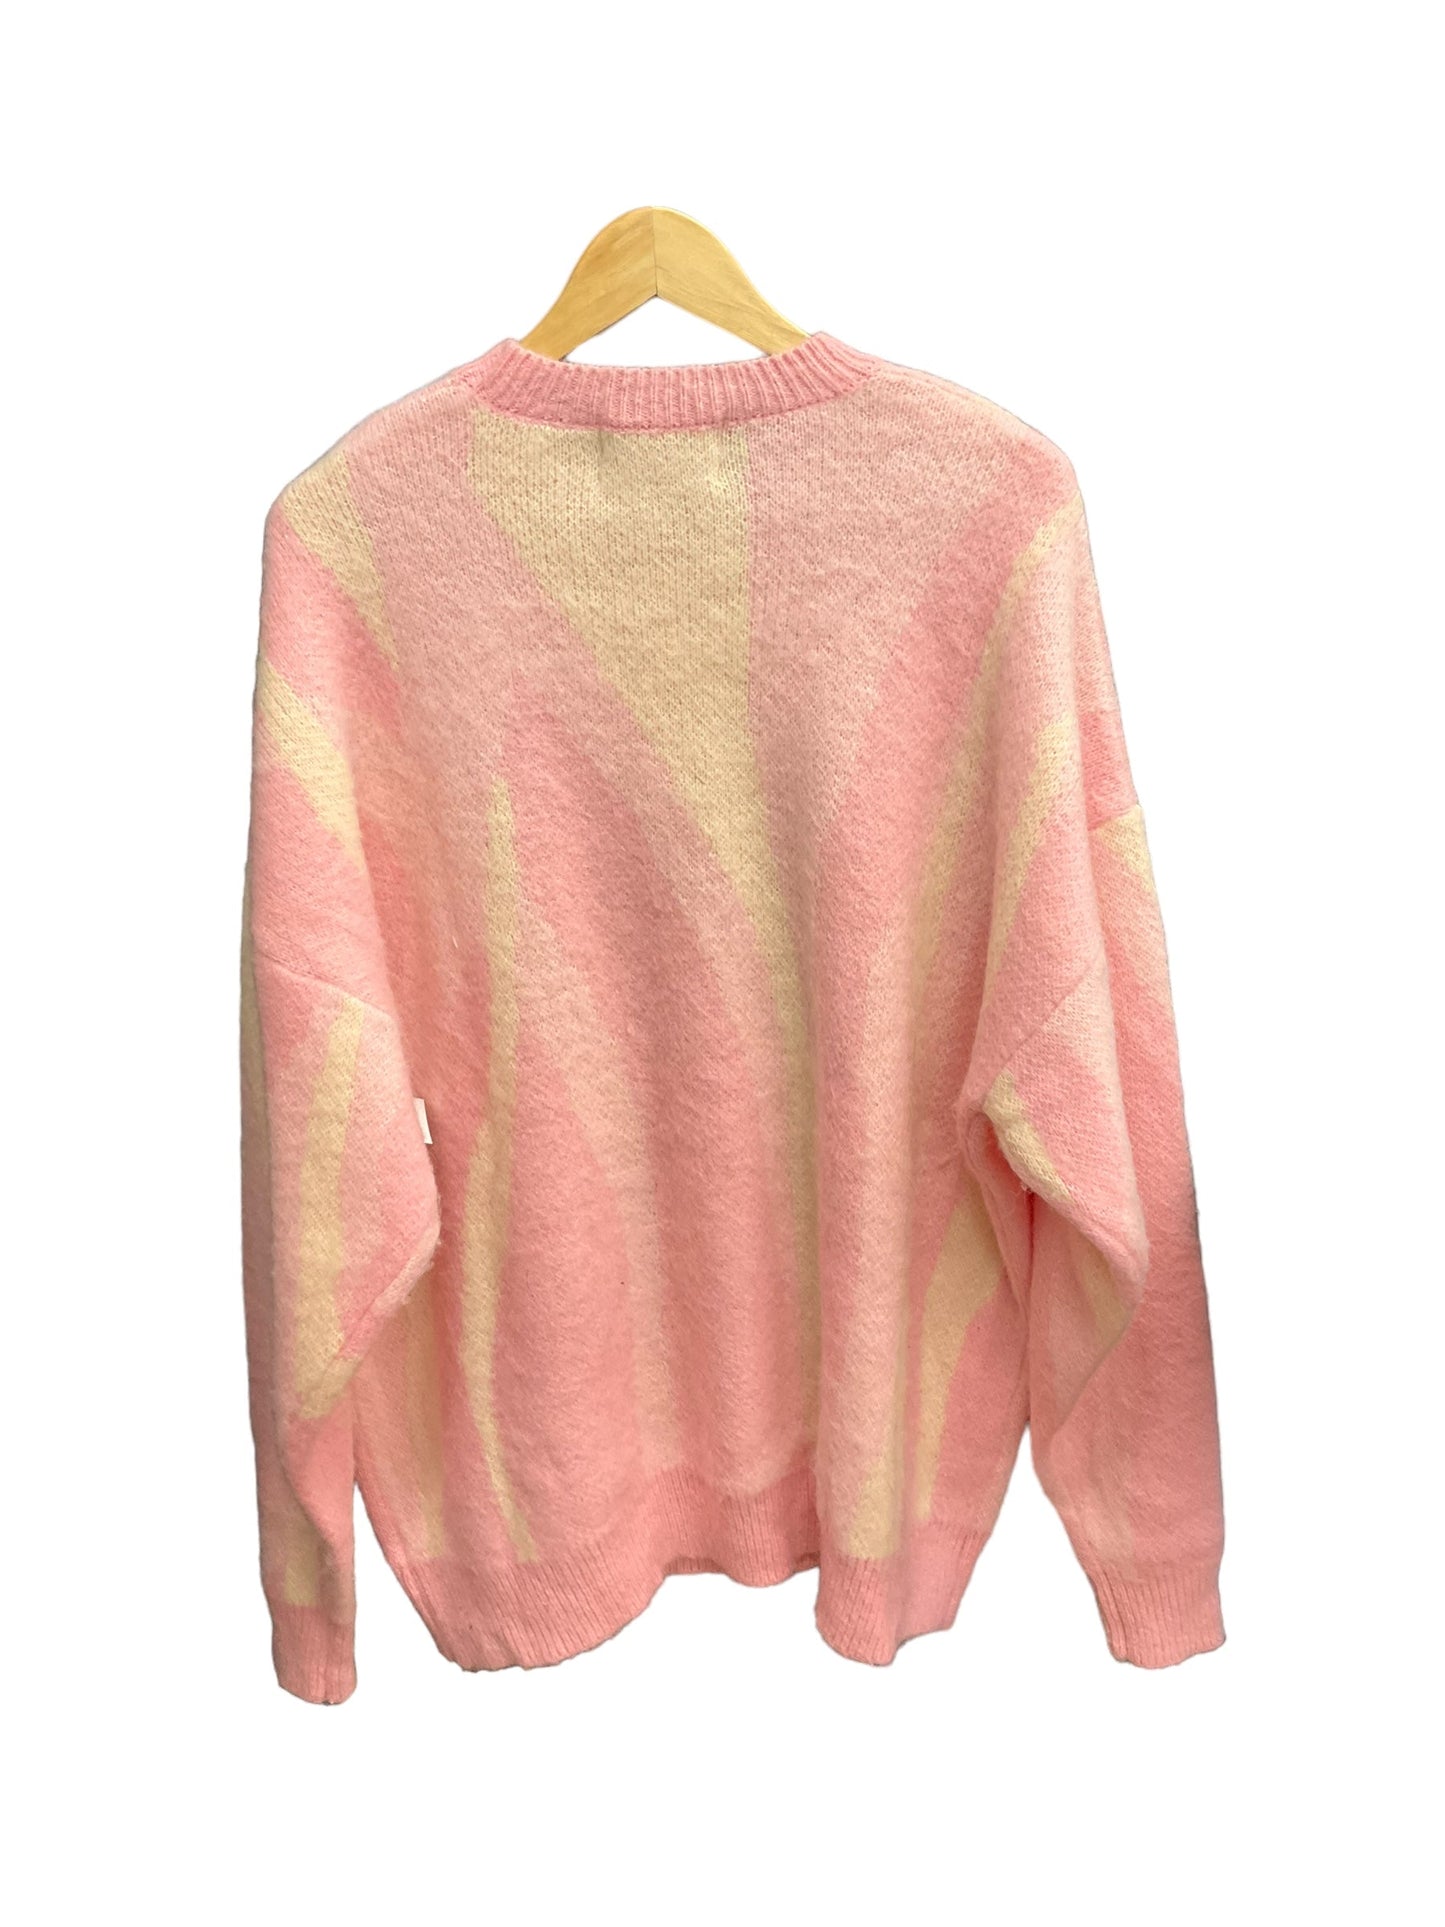 Pink & White Sweater Clothes Mentor, Size Xl